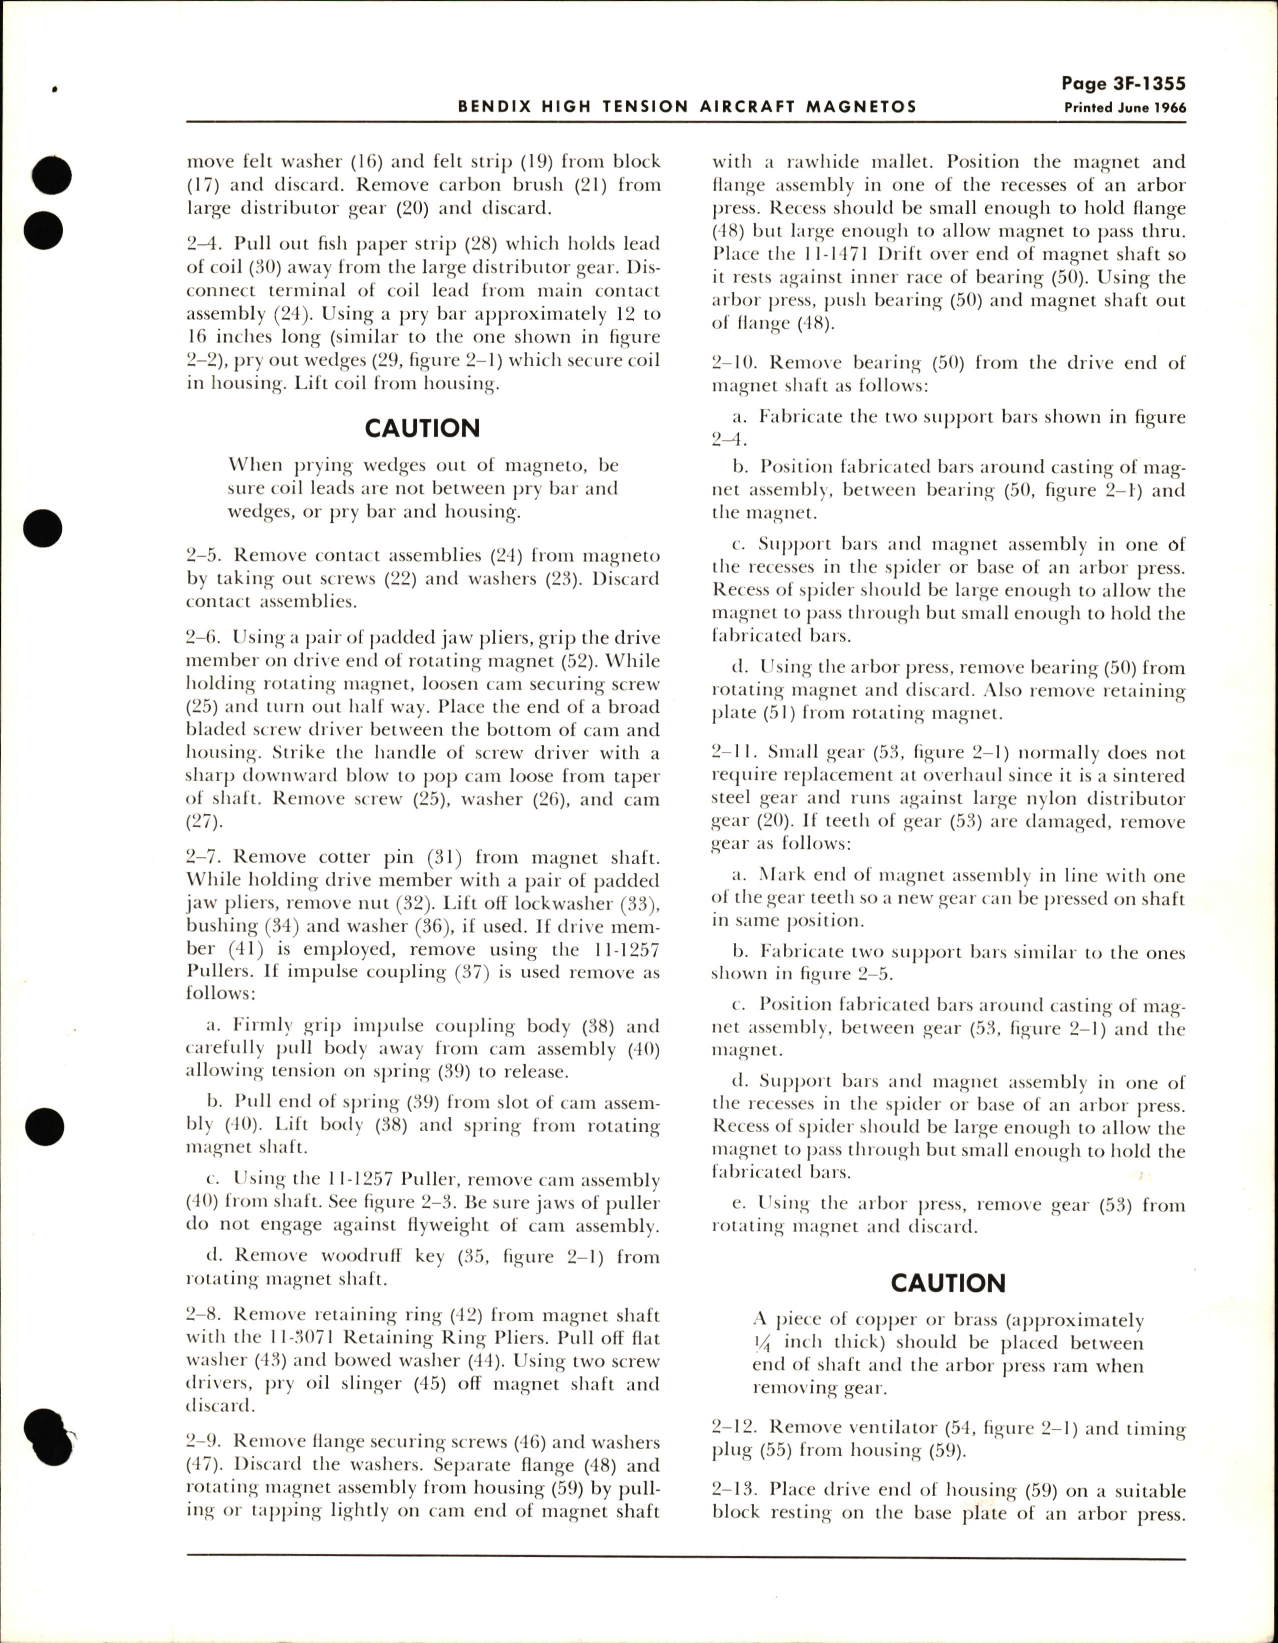 Sample page 5 from AirCorps Library document: Overhaul Instructions for S-1200 Series High Tension Aircraft Magnetos